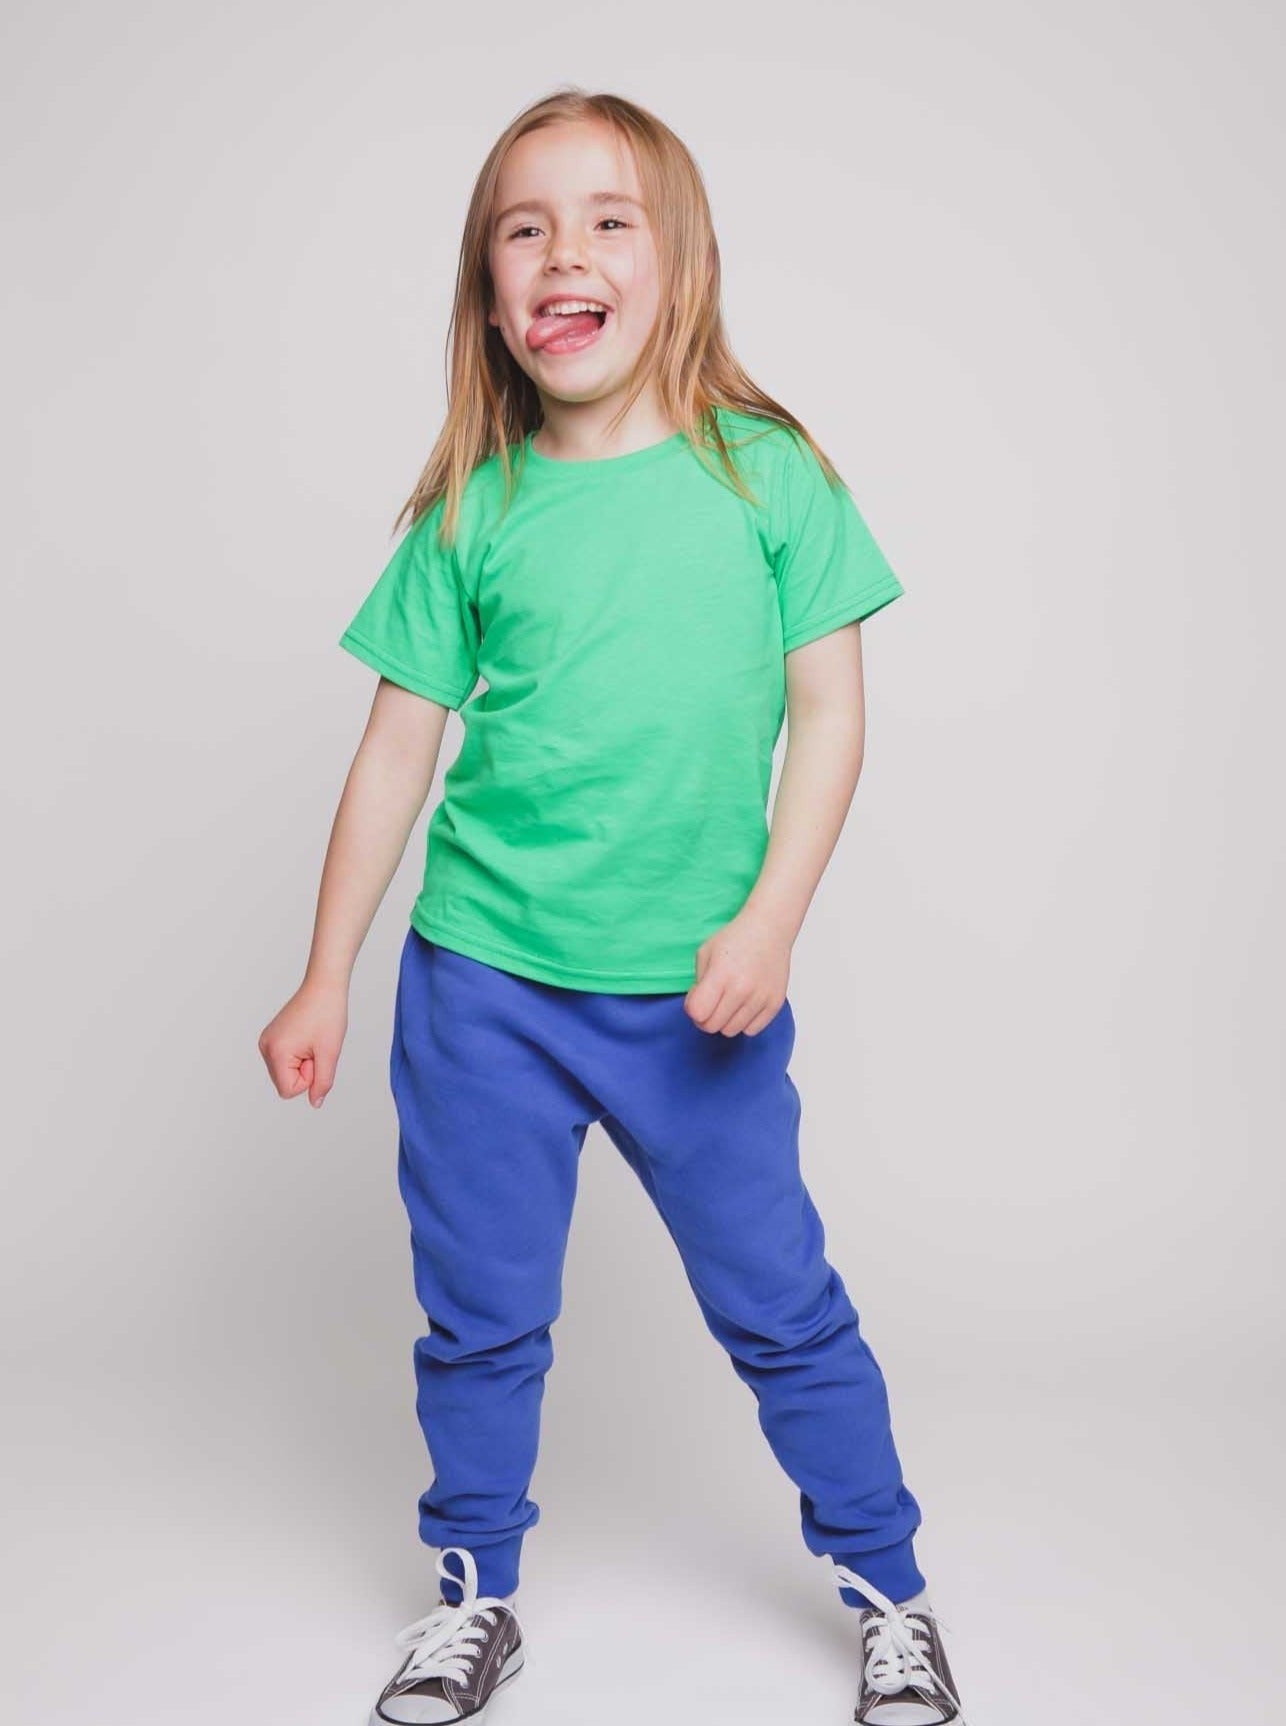 A blonde haired girl wearing a green t-shirt and blue trousers - Hues Clothing